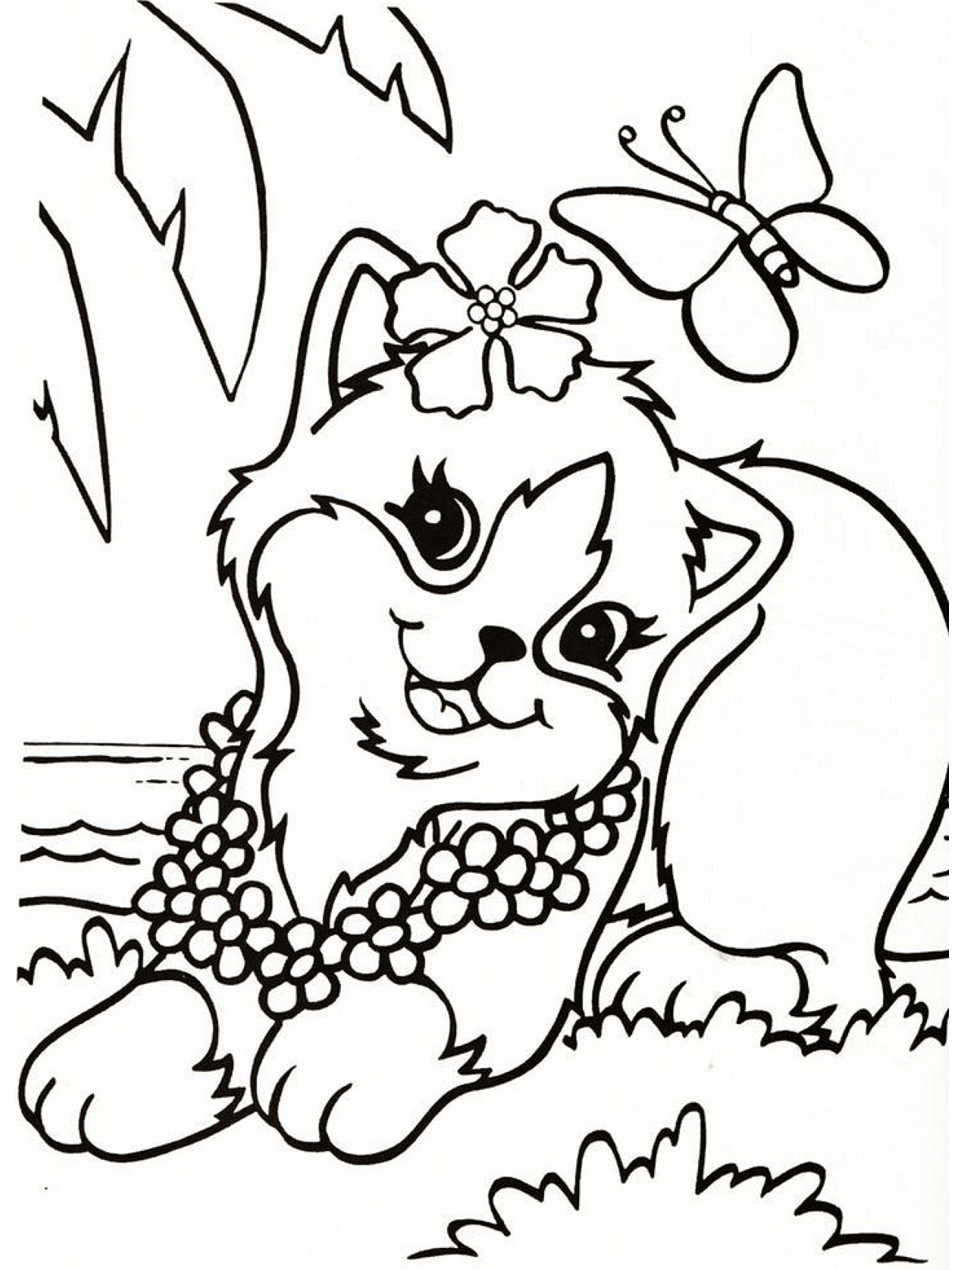 Printable Lisa Frank Coloring Pages - Customize and Print